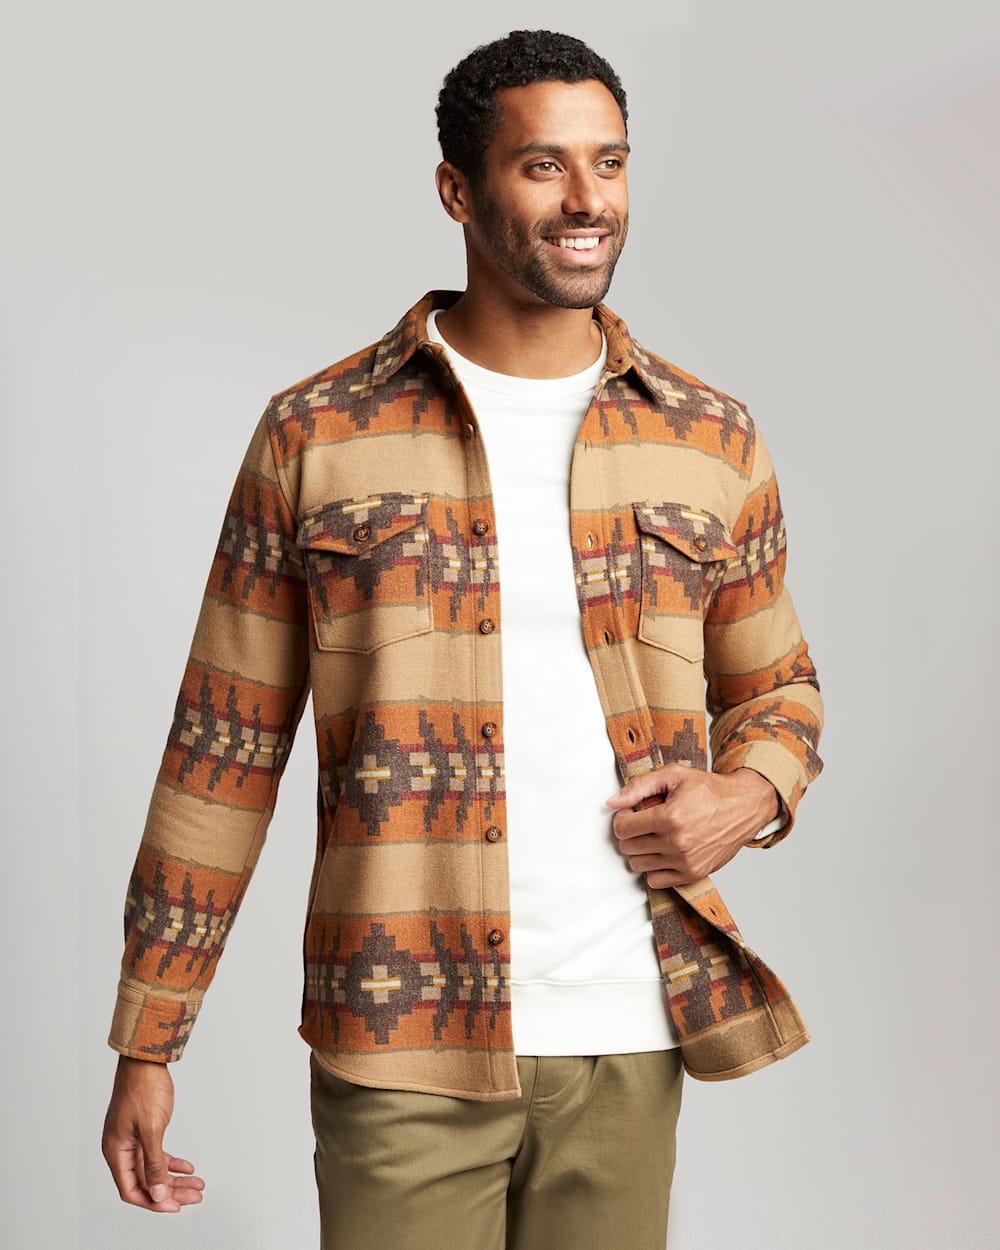 ALTERNATE VIEW OF MEN'S FITTED LA PINE OVERSHIRT IN TAN BANDED STRIPE image number 5